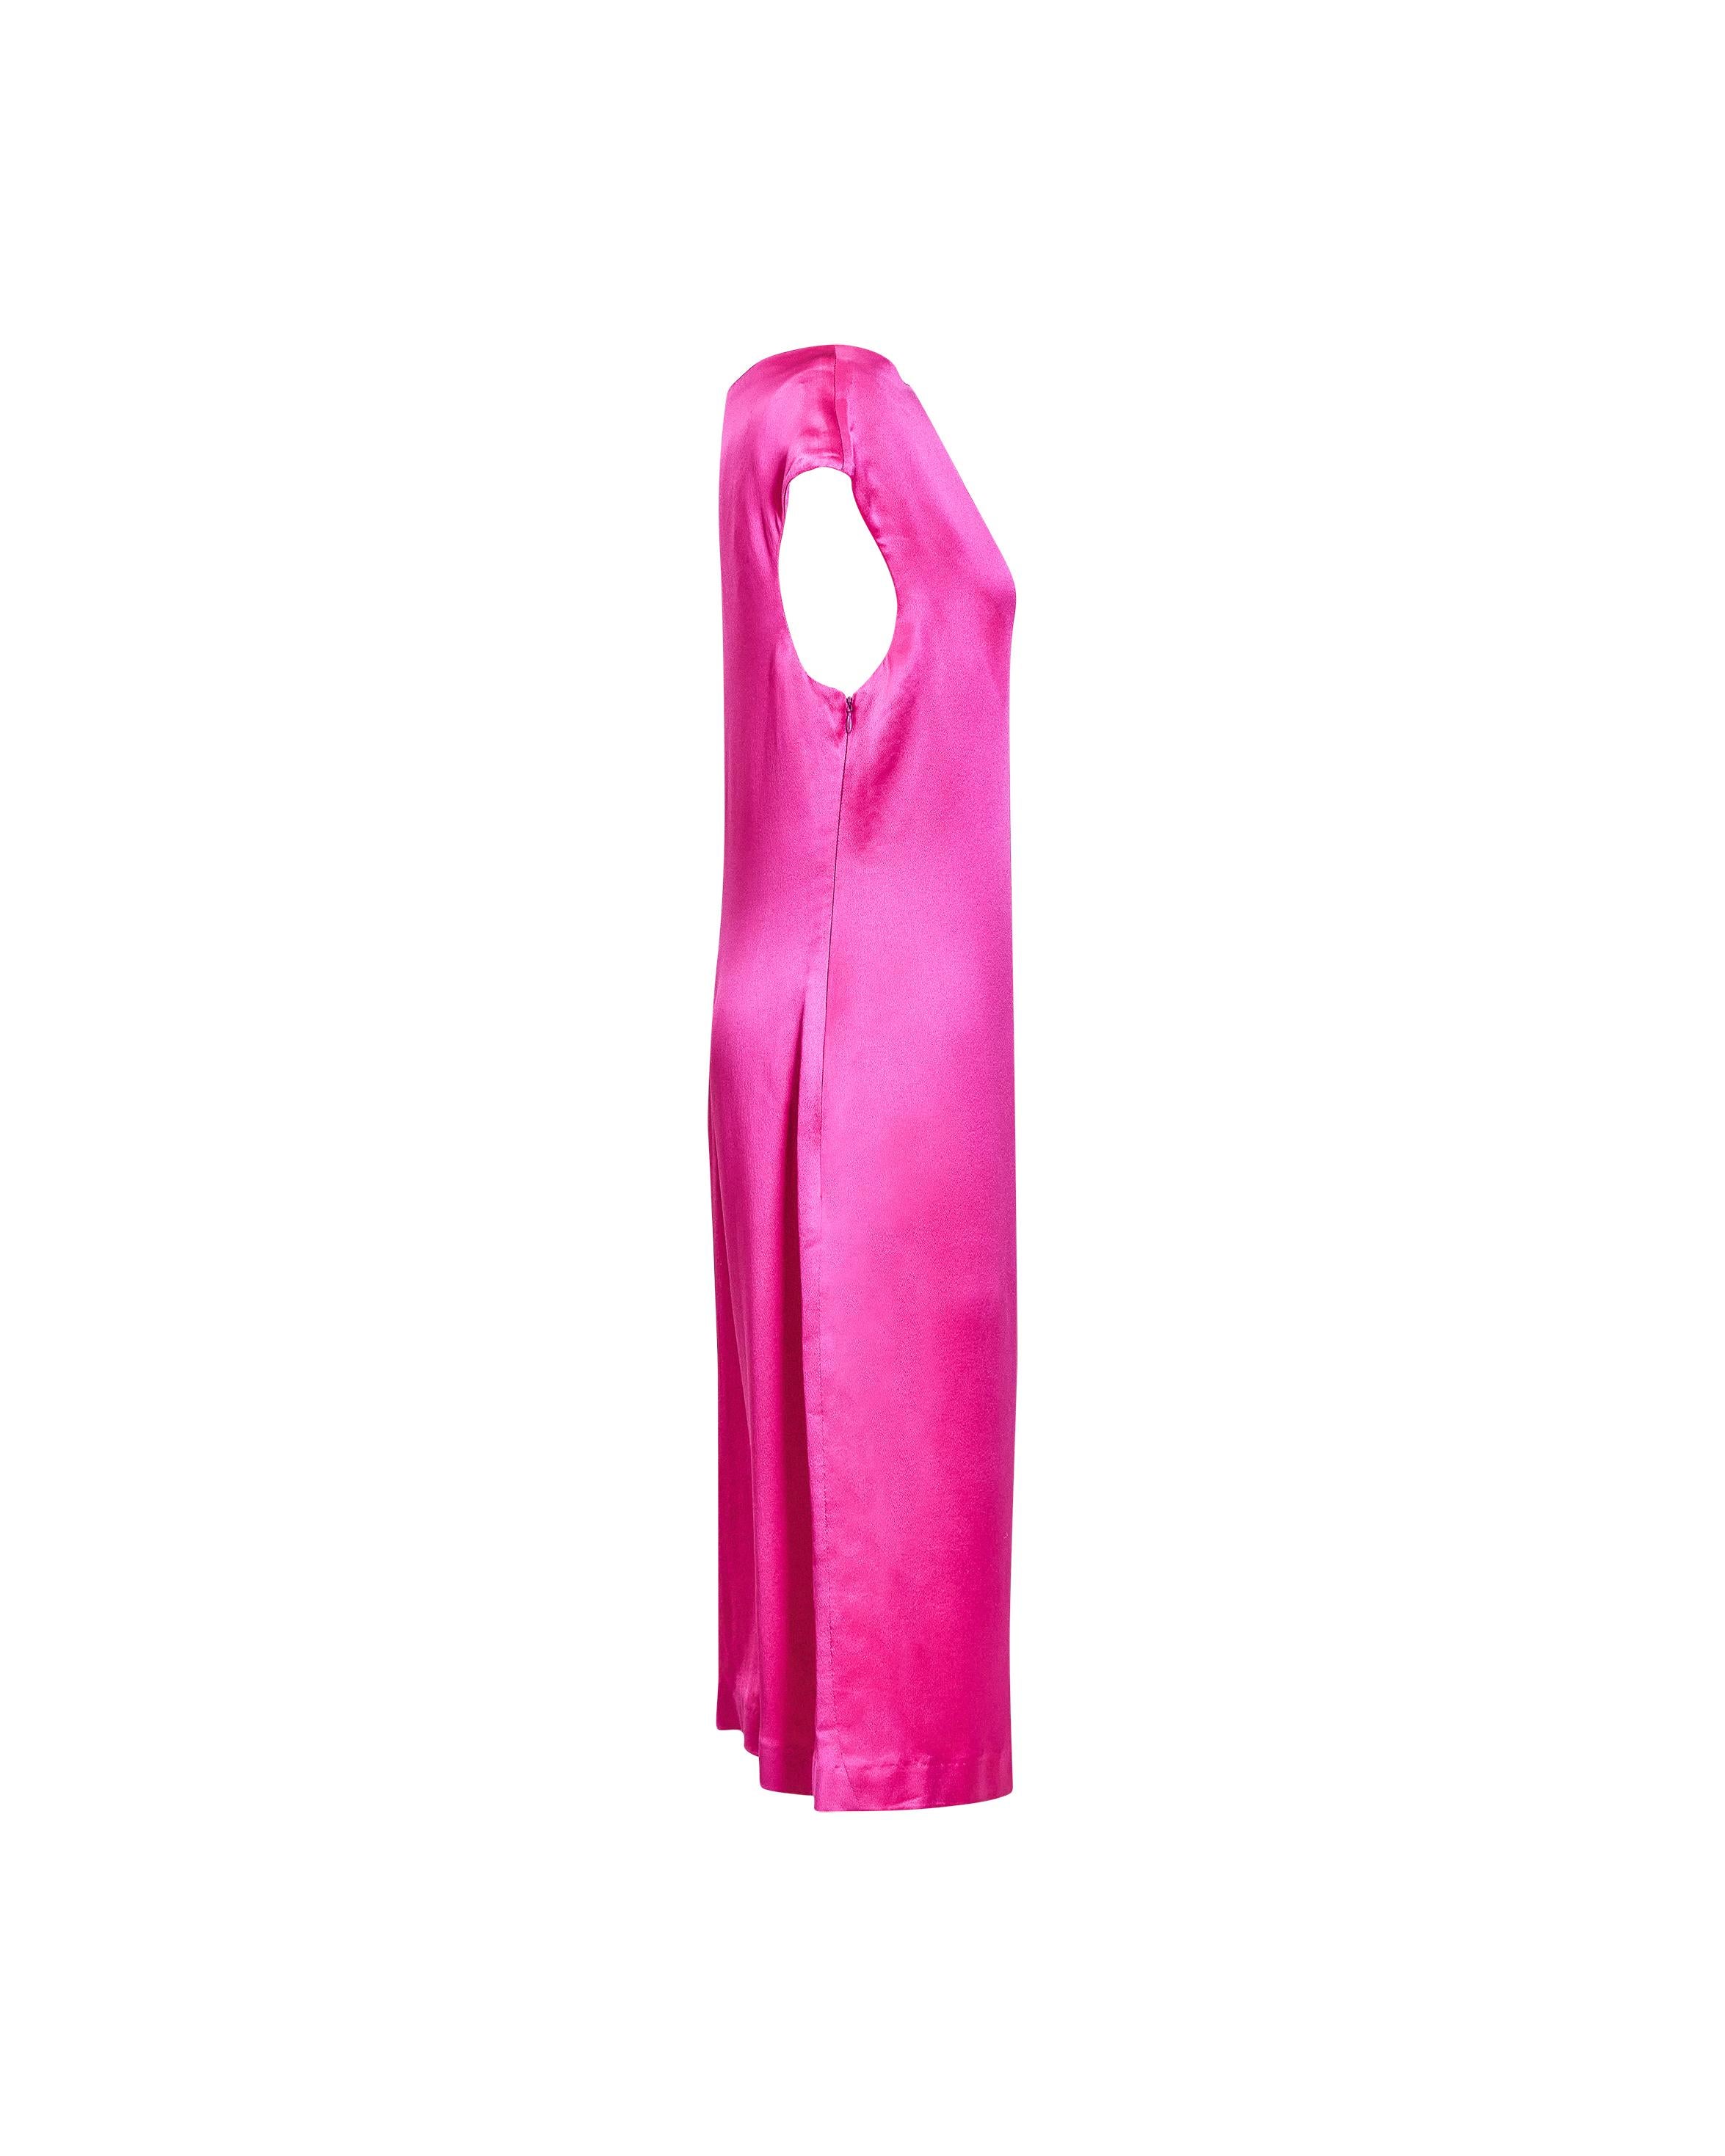 S/S 2008 Alexander McQueen hot pink asymmetrical charmeuse midi dress. Features subtle asymmetrical stitching across front. Side zip closure and built-in silk lining.